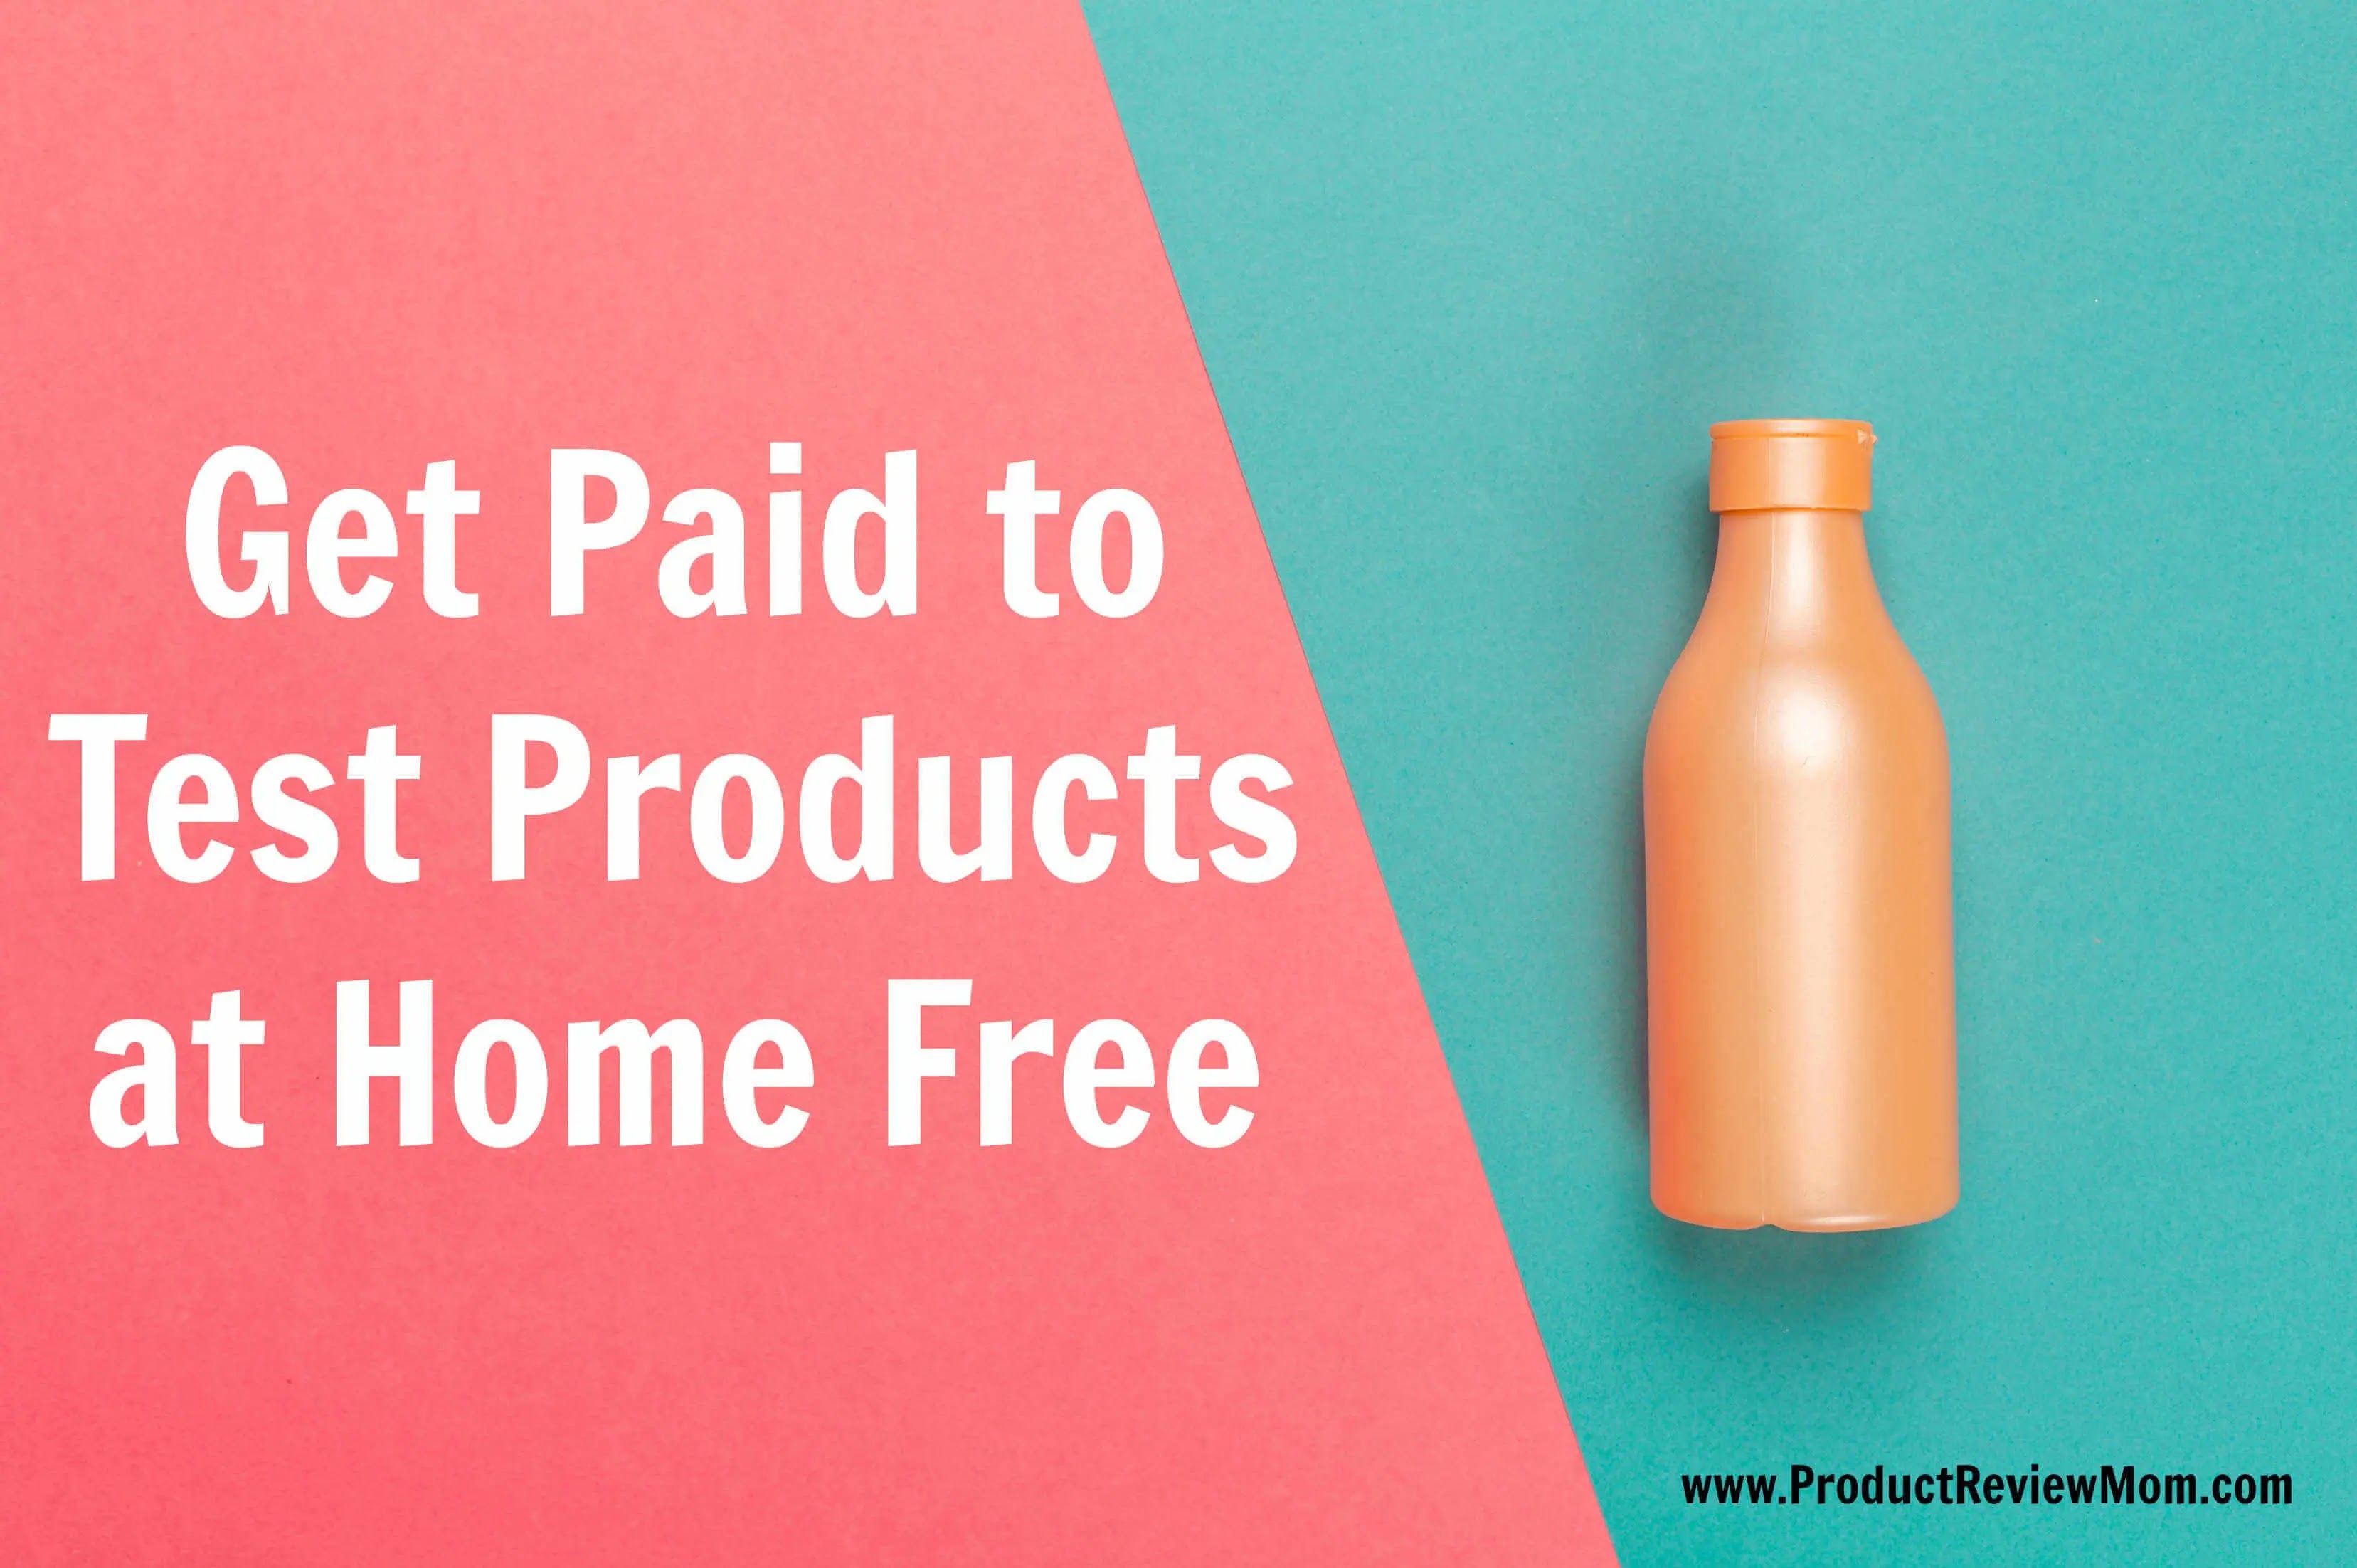 12 Legit Ways to Get Paid to Test Products